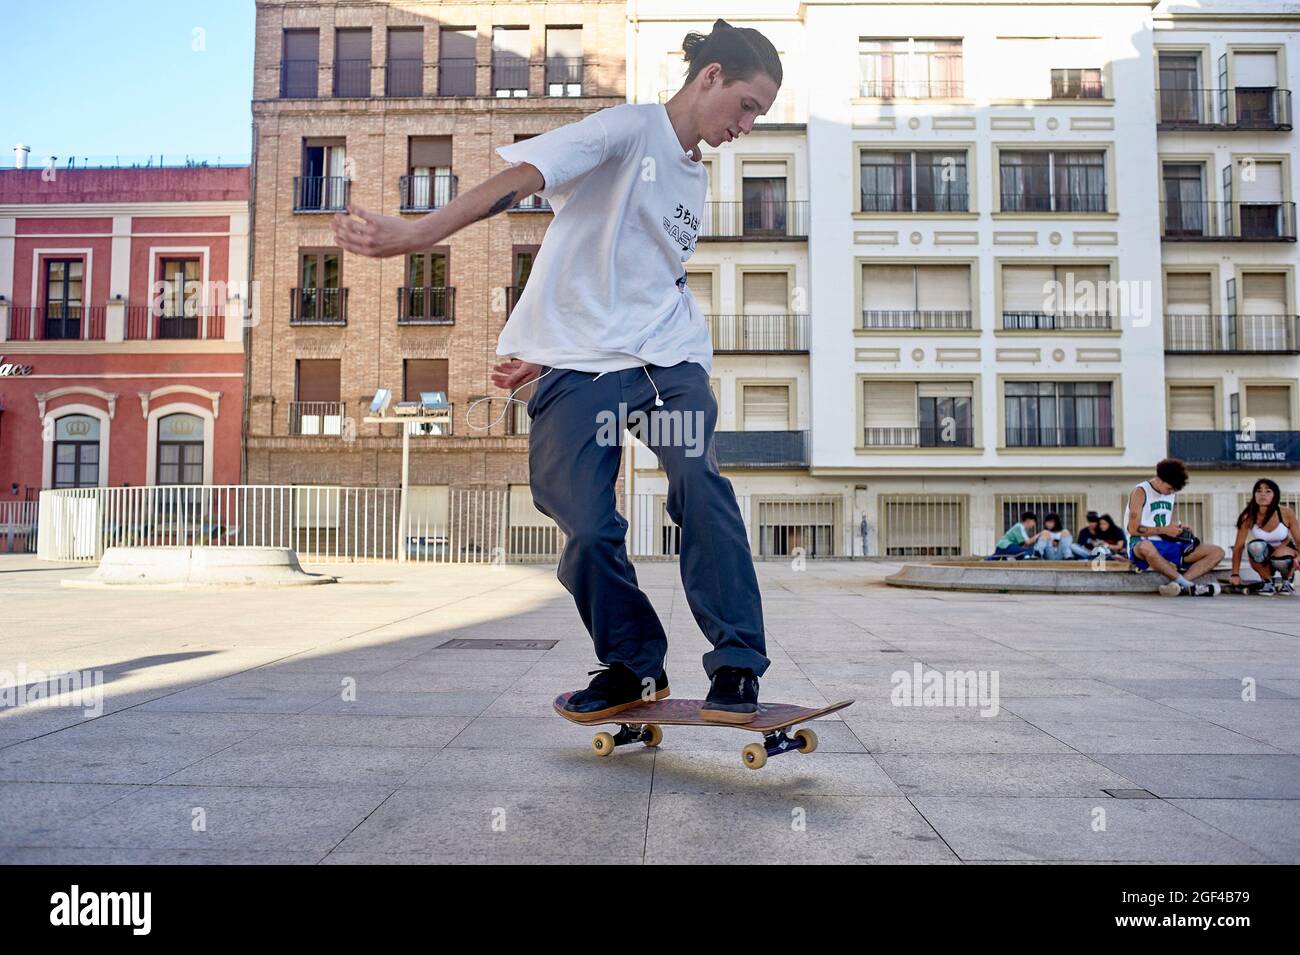 young person riding on skateboard in the city Stock Photo - Alamy